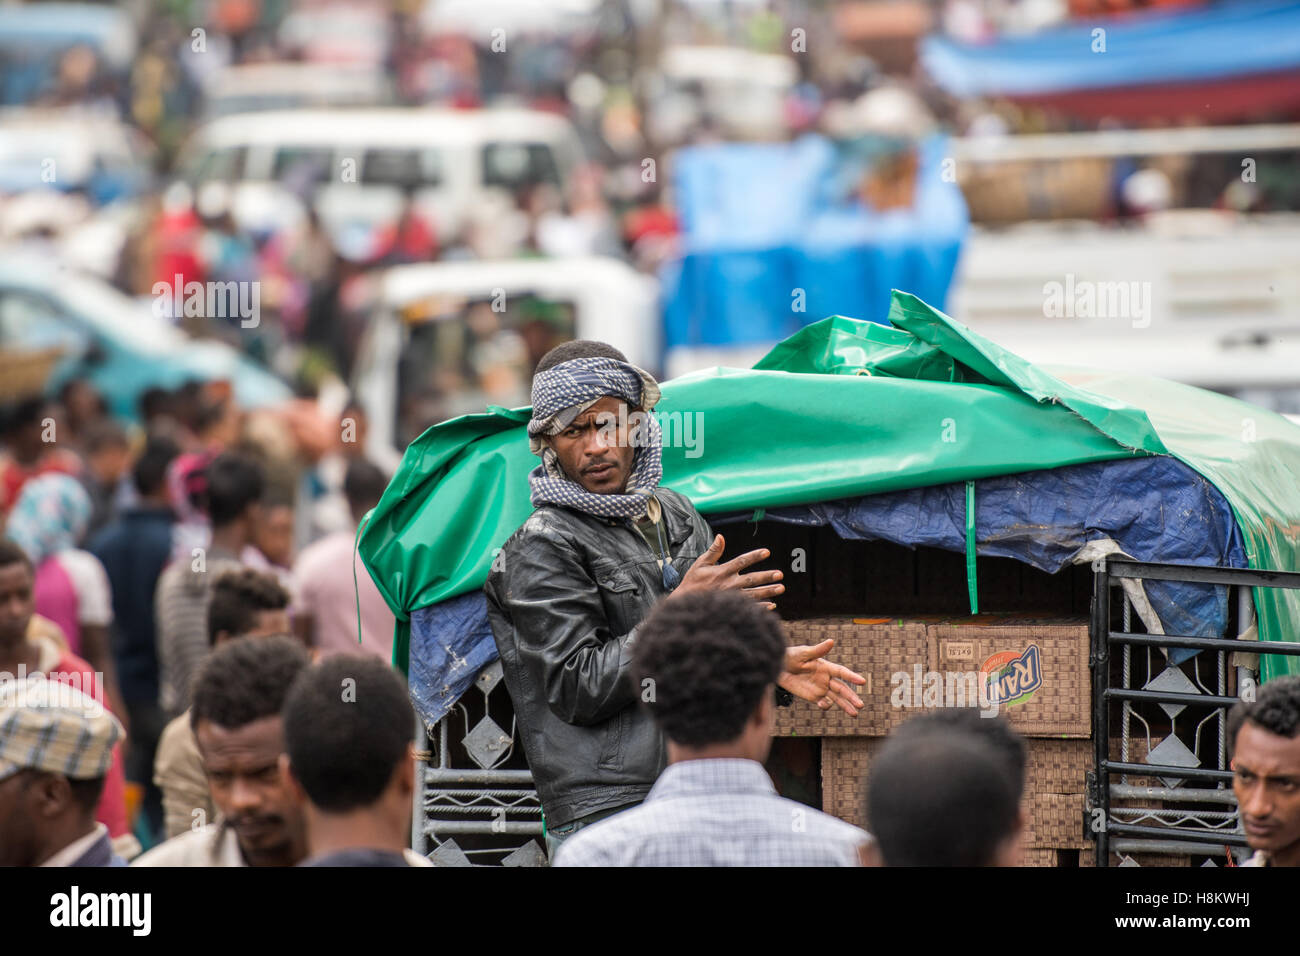 Addis Ababa, Ethiopia- Crowds of locals at the Addis Mercato, the largest open air market in Africa. Stock Photo